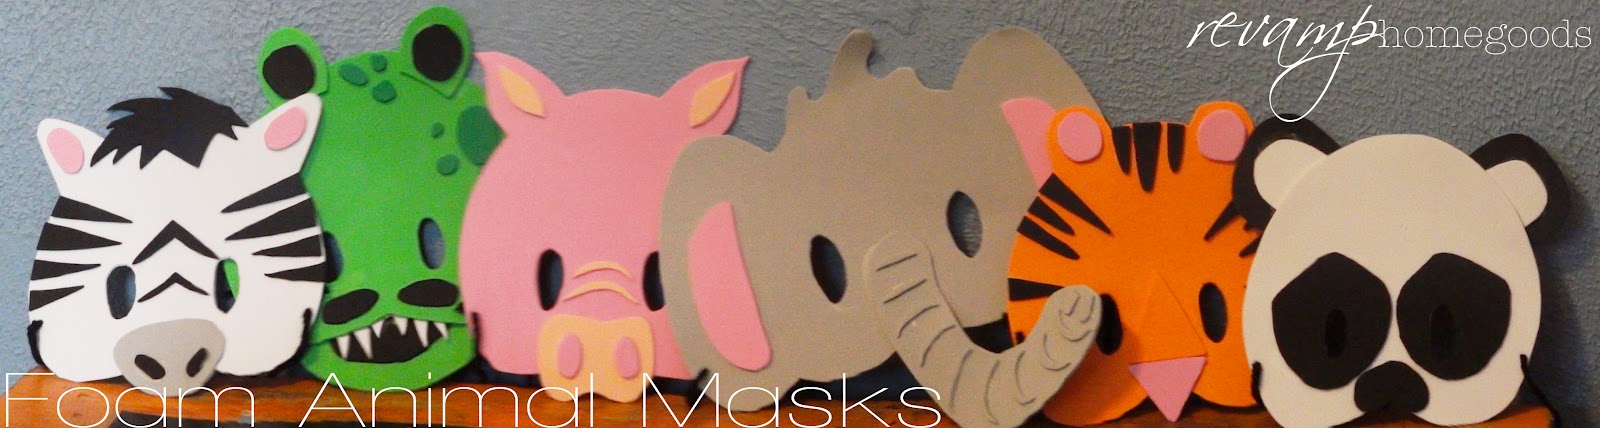 Easy DIY Animal Masks from Craft Foam - Welcome To Nana's